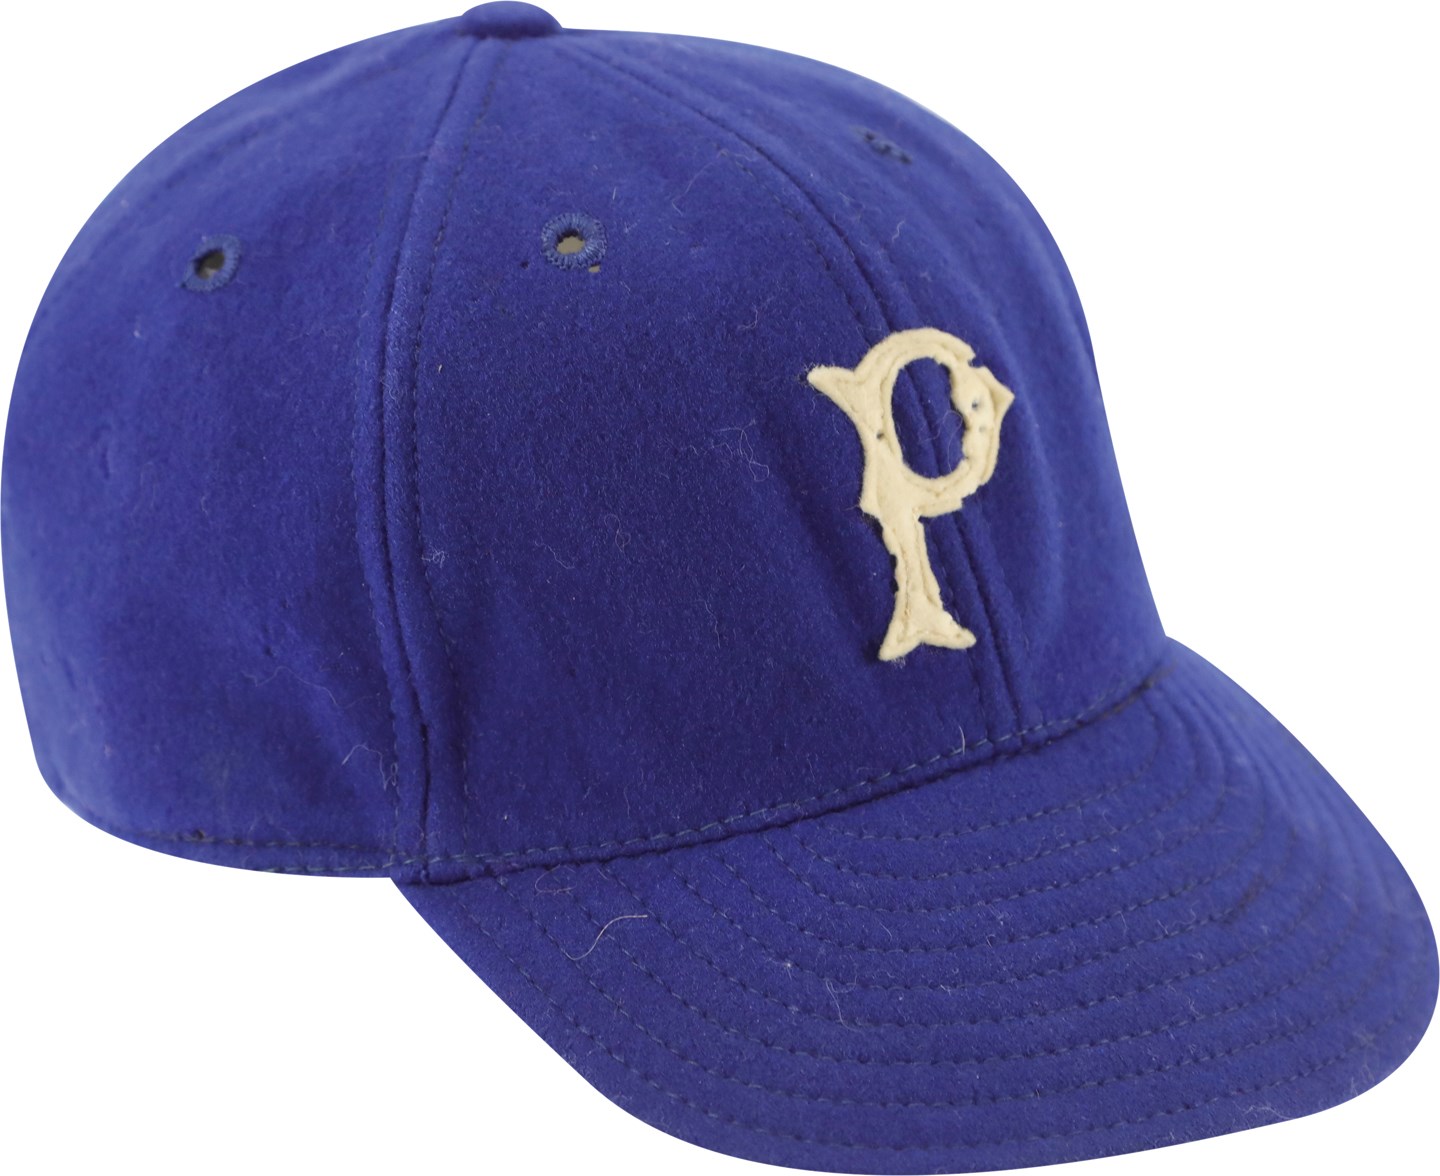 - Mid-1940s Pete Coscarart Pittsburgh Pirates Game Worn Cap